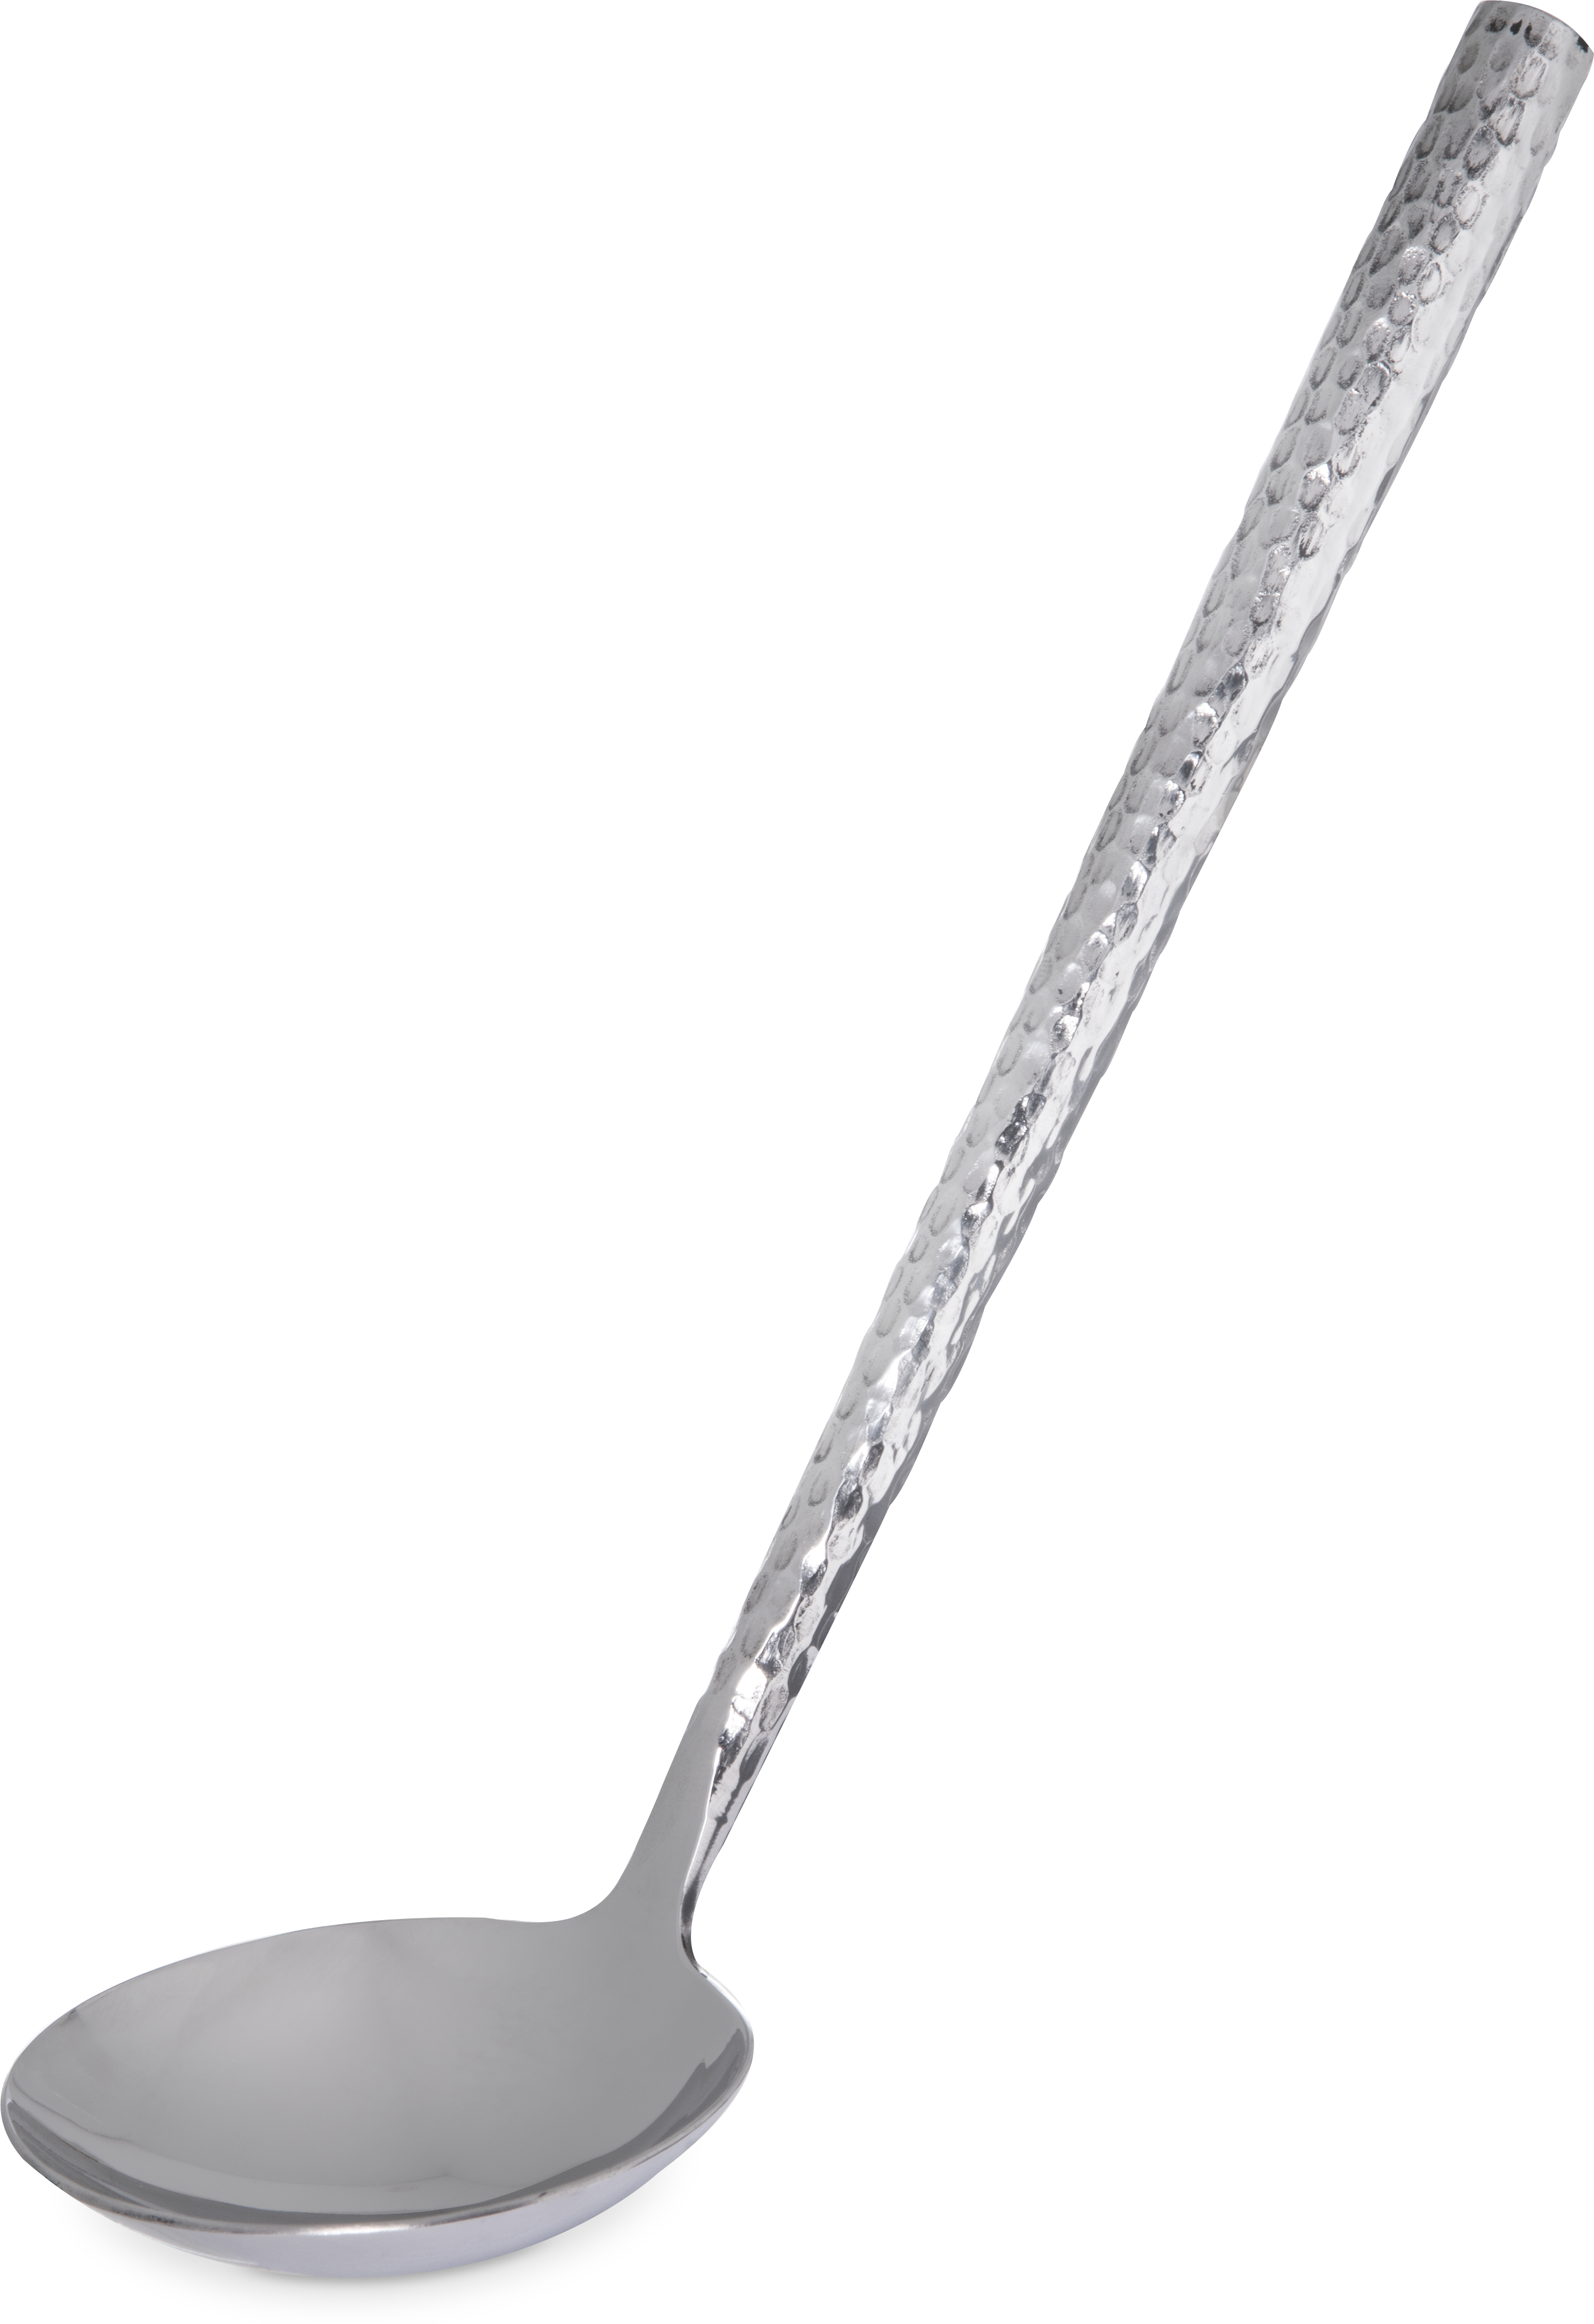 Terra Ladle 8.75 - 1 oz - Hammered Mirror Finish - Stainless Steel